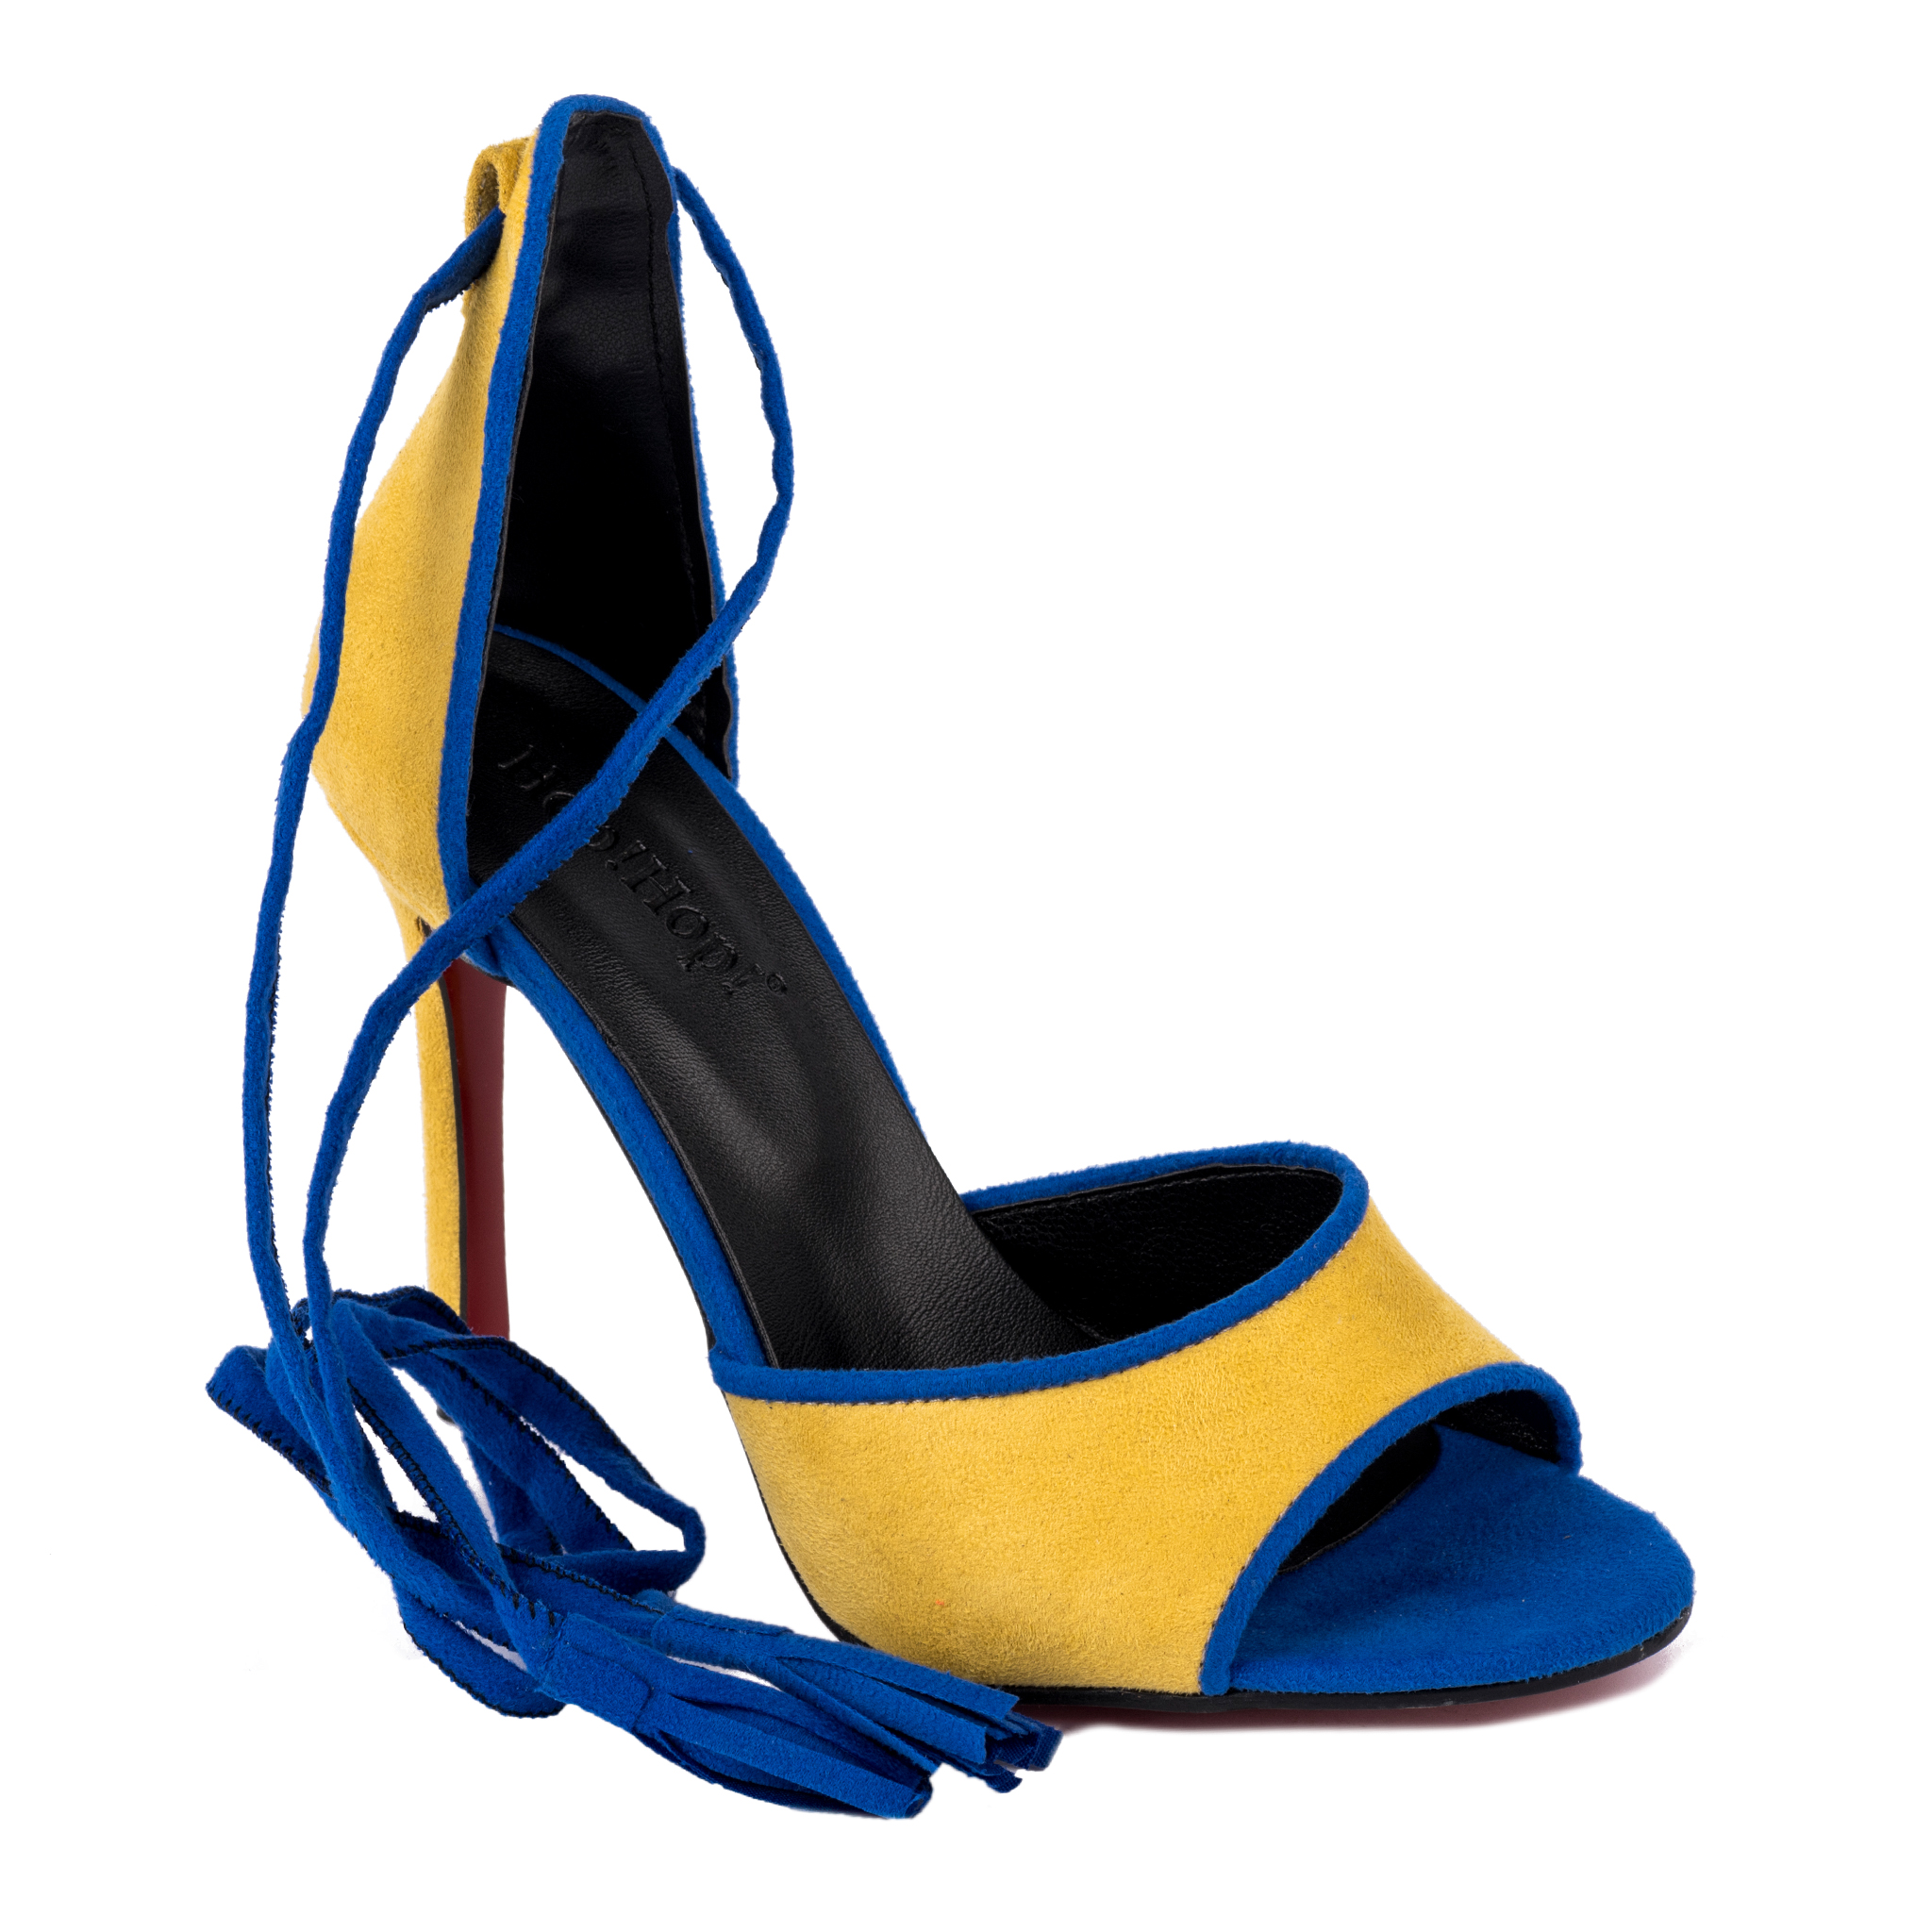 VELOUR LACE UP THIN HEEL SANDALS - YELLOW/BLUE